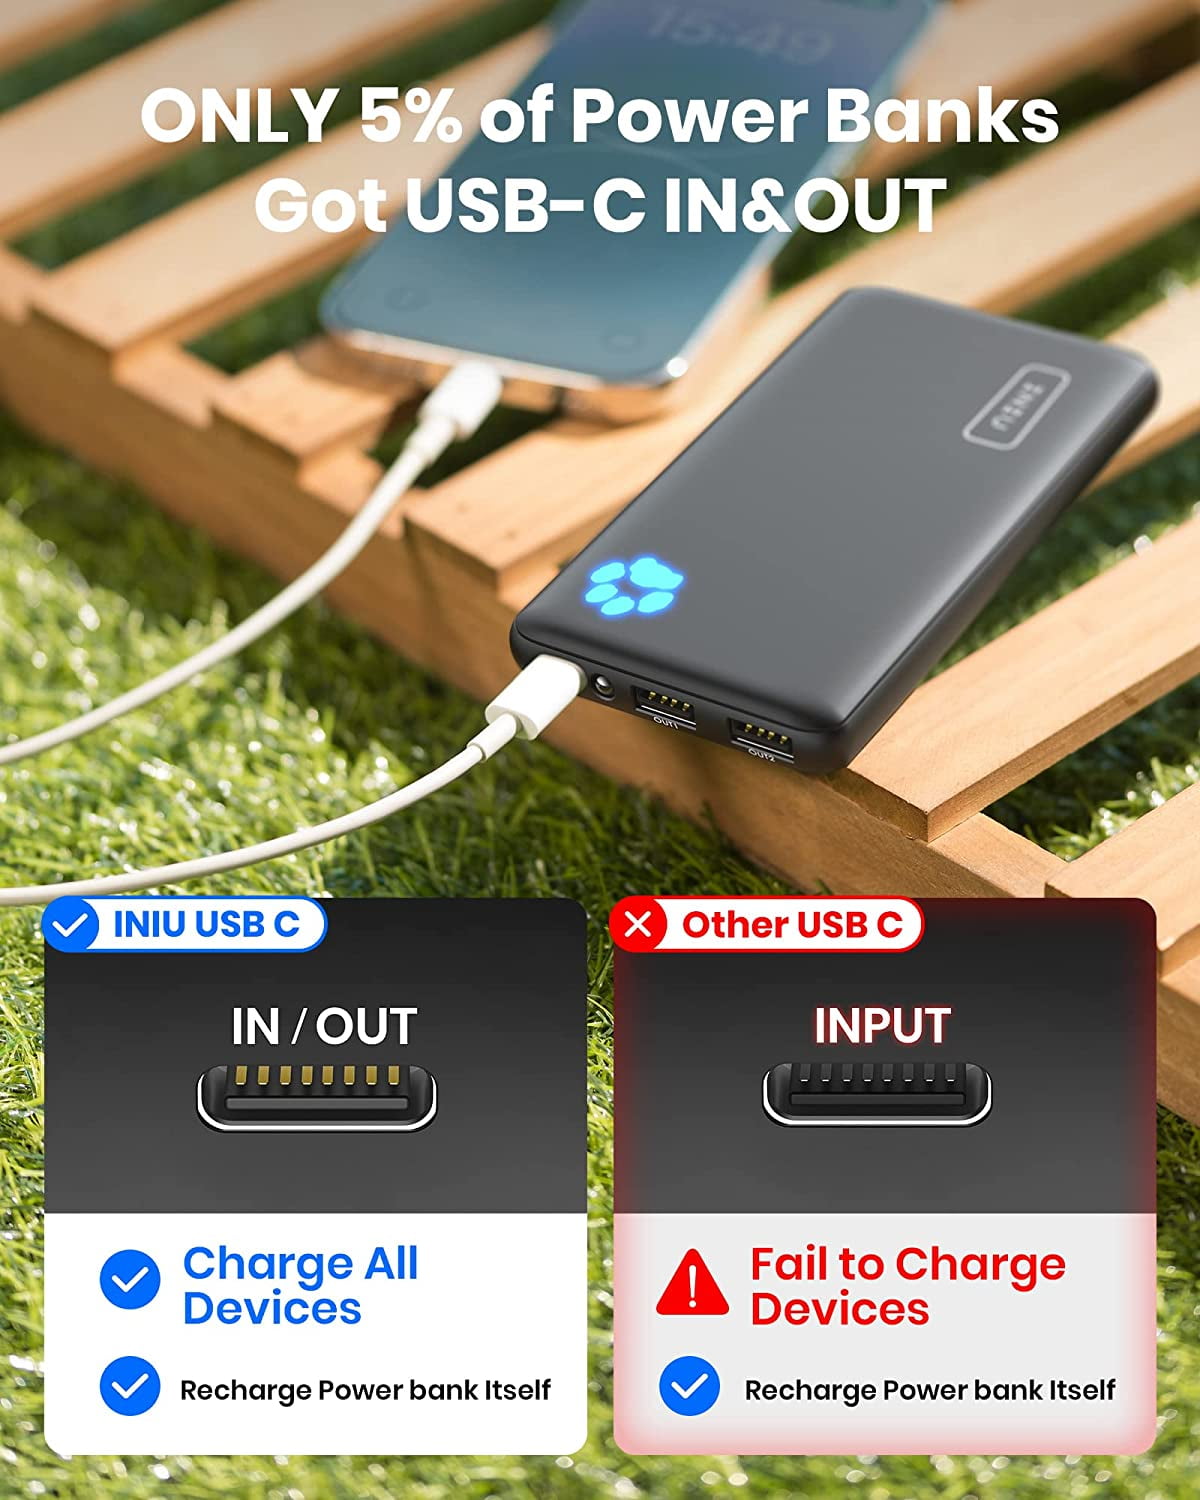 INIU Portable Charger, 10000mAh 5V/3A Slimmest Power Bank, USB C in&Out Battery  Pack for iPhone Samsung Google LG iPad and More, Black 